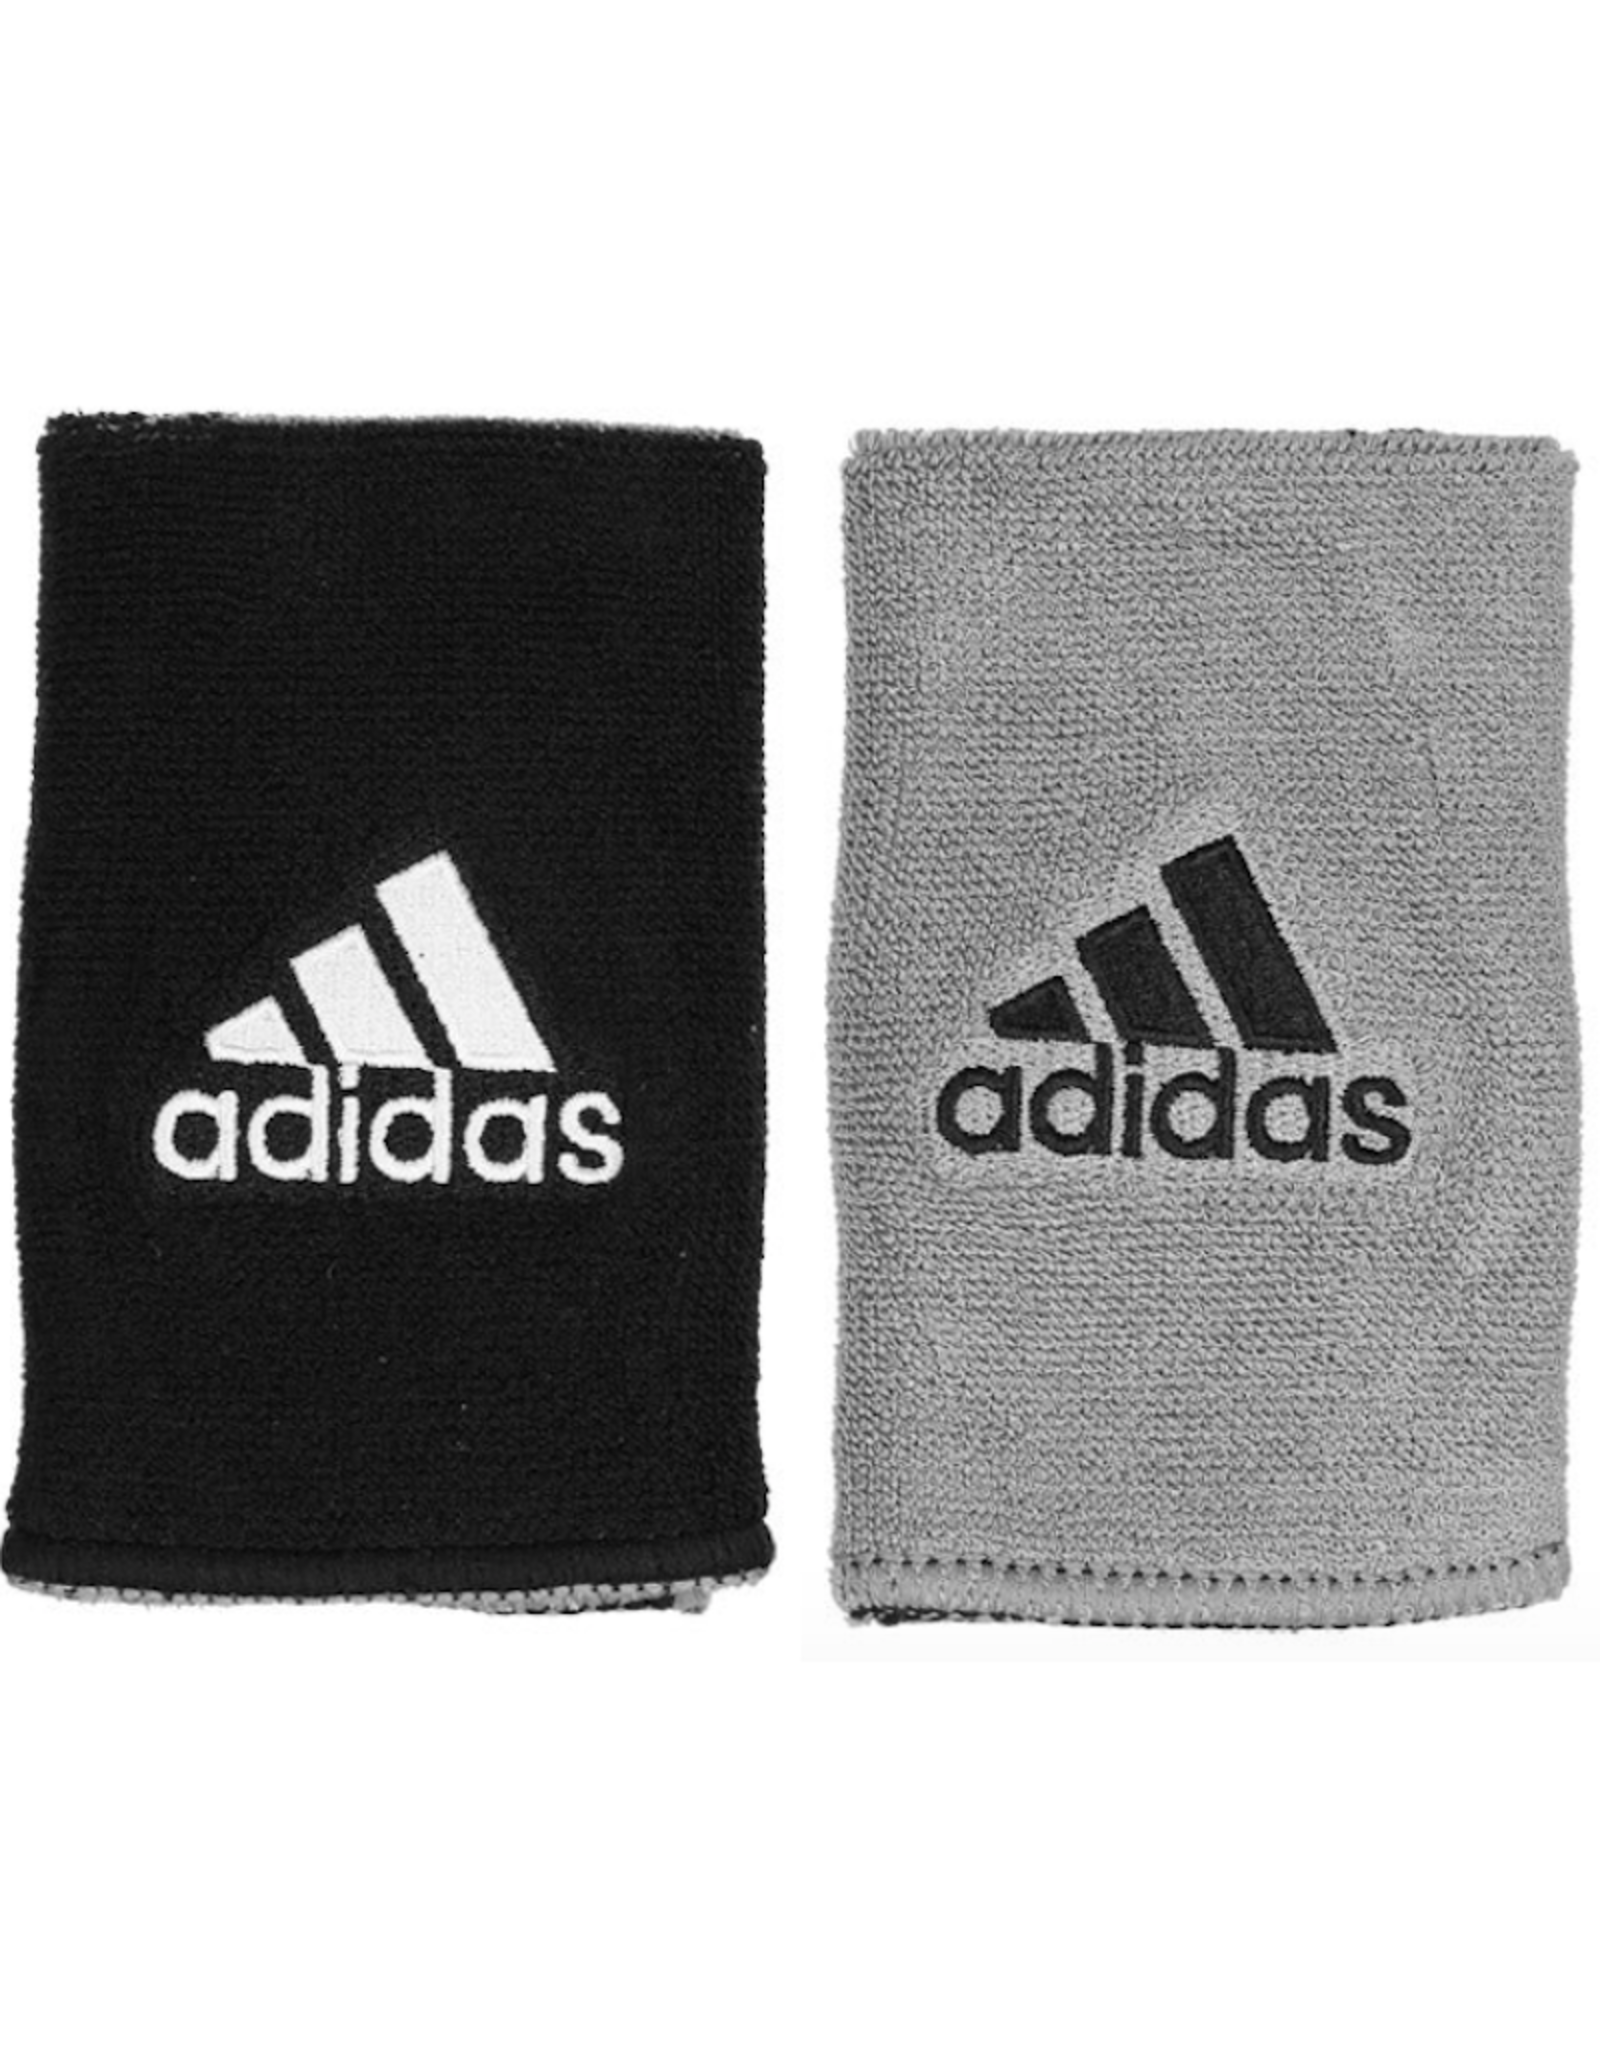 ADIDAS DOUBLE WIDE INTERVAL REVERSIBLE WRISTBAND BLACK/GREY